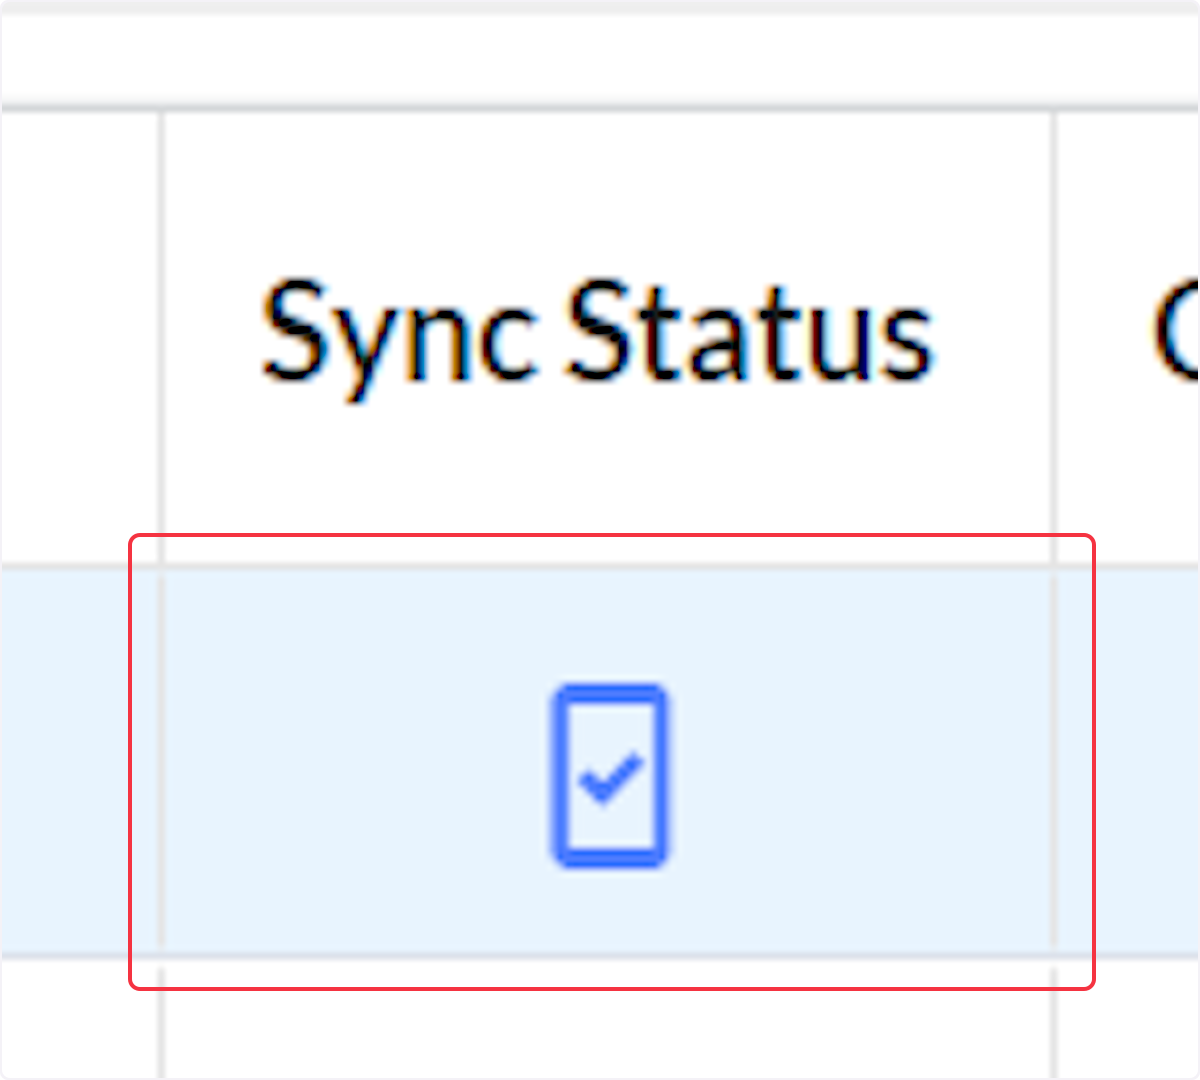 For Inspections that are synced, you should see this icon in the Sync Status column.